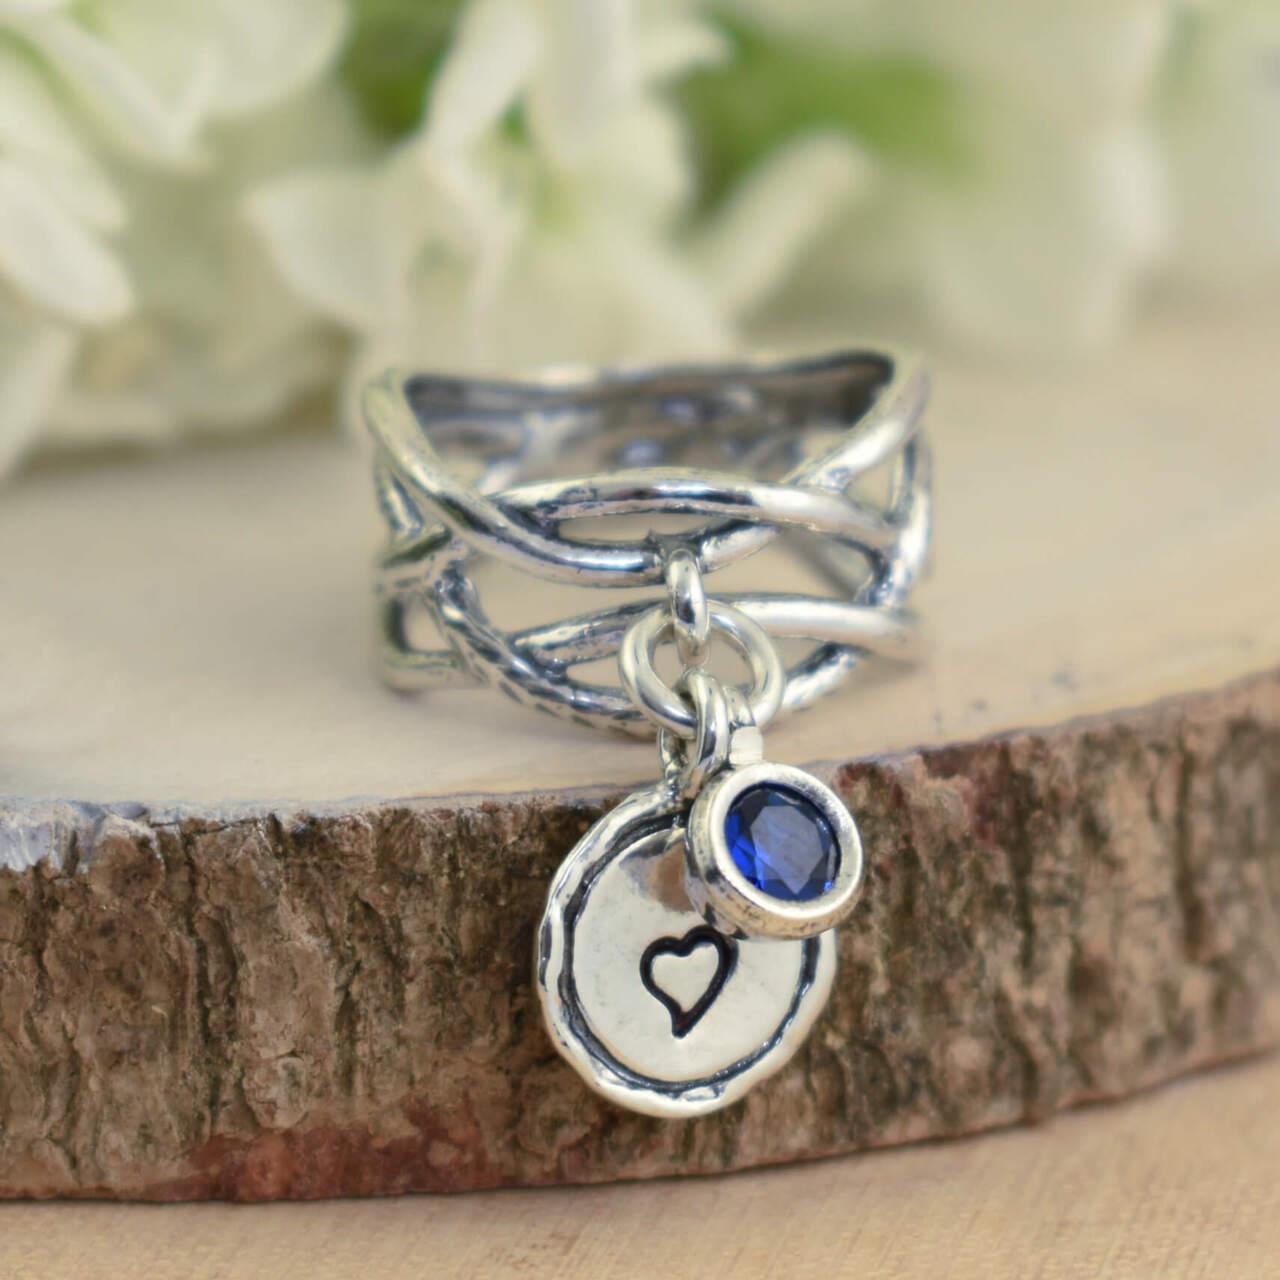 Included with a hand stamped initial or heart - you decide!